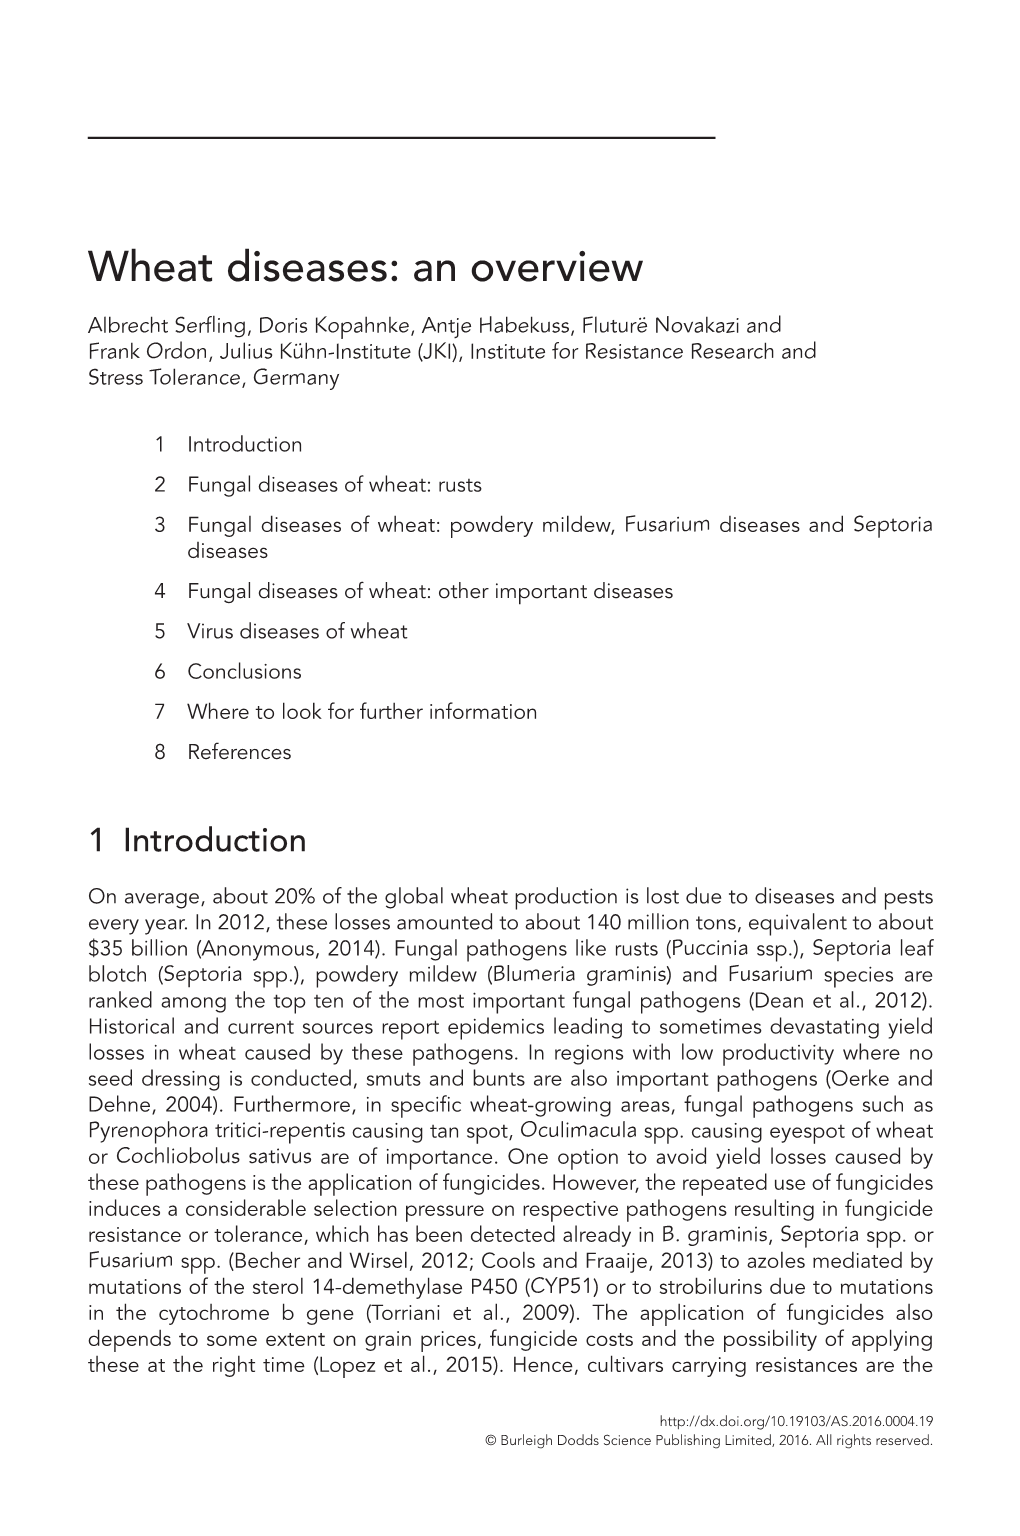 Wheat Diseases: an Overview